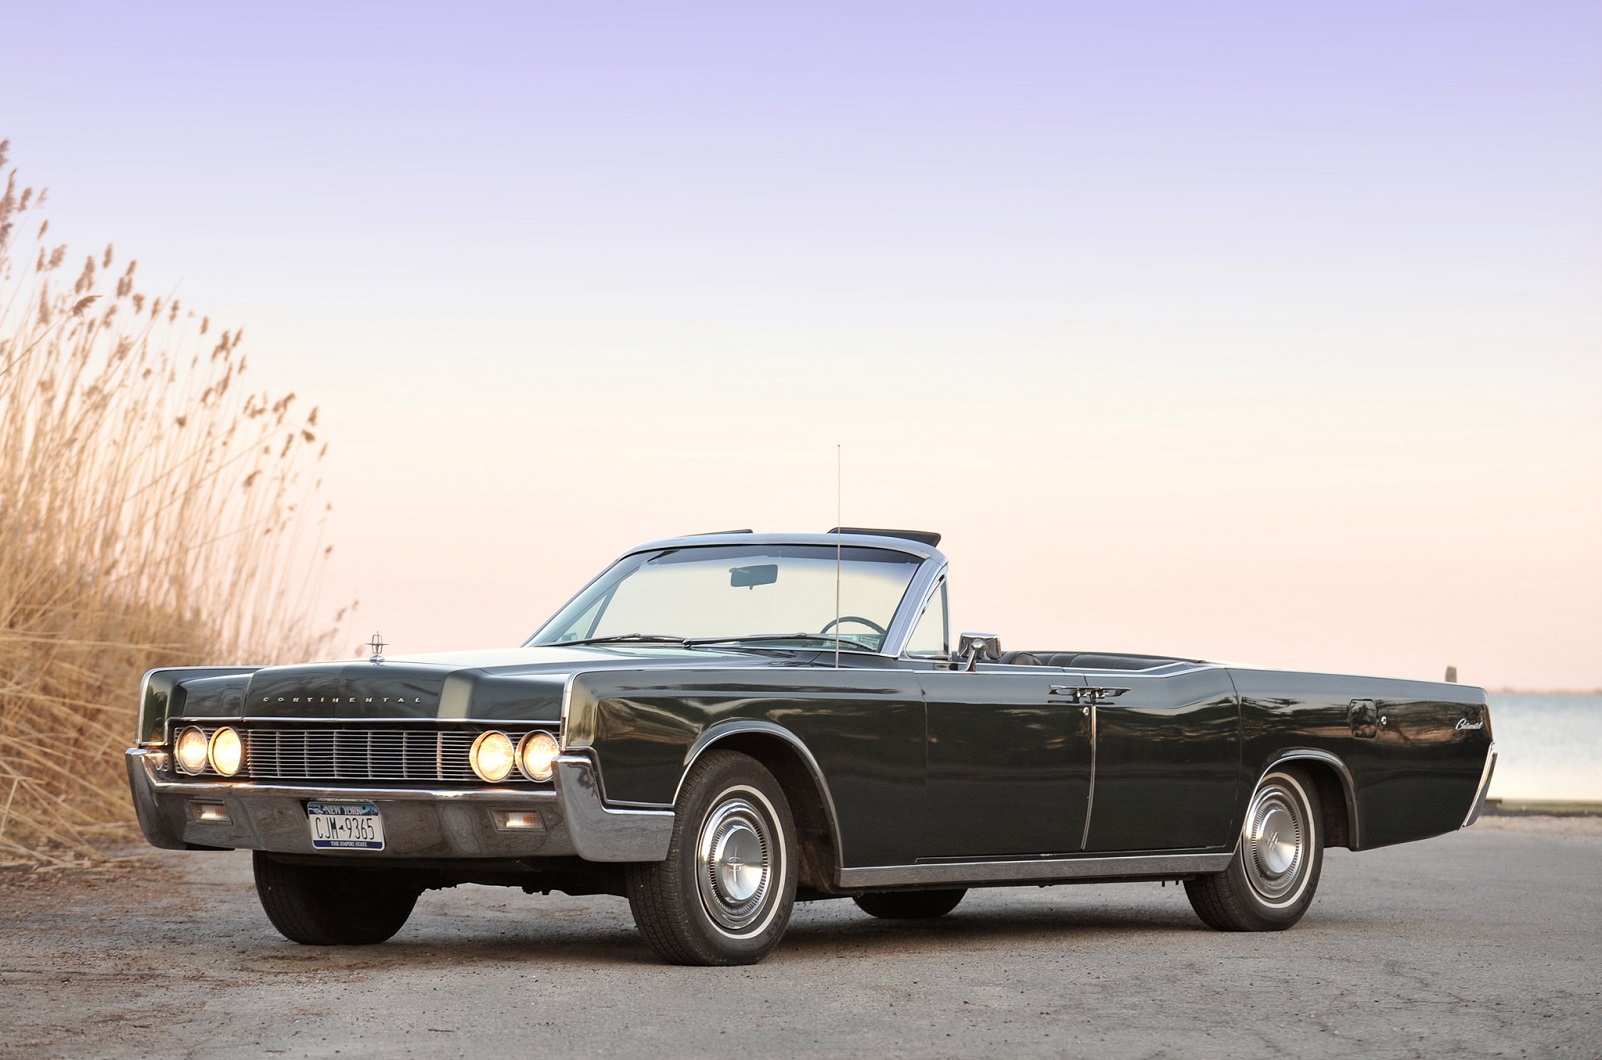 <p>Lincoln’s 1961 fourth-generation Continental was smaller than its predecessor but heavier and this meant a bigger engine was needed. To do this, <strong>Ford</strong> extended its 7.0-liter V8 to 7.6-liters in 1966, creating the <strong>biggest</strong> car engine the Blue Oval had ever produced up to this time.</p><p>However, the 7.6-liter engine enjoyed only a brief life in the Continental and was replaced by the all-new and slightly <strong>smaller</strong> capacity 7.5-liter 385-series V8. Even so, the 7.6-liter unit that was built at Ford’s <strong>Lima</strong> plant in Ohio remains the most <strong>sought-after</strong> by classic car fans for its rarity and appeal as the grandest engine used in the Continental.</p>